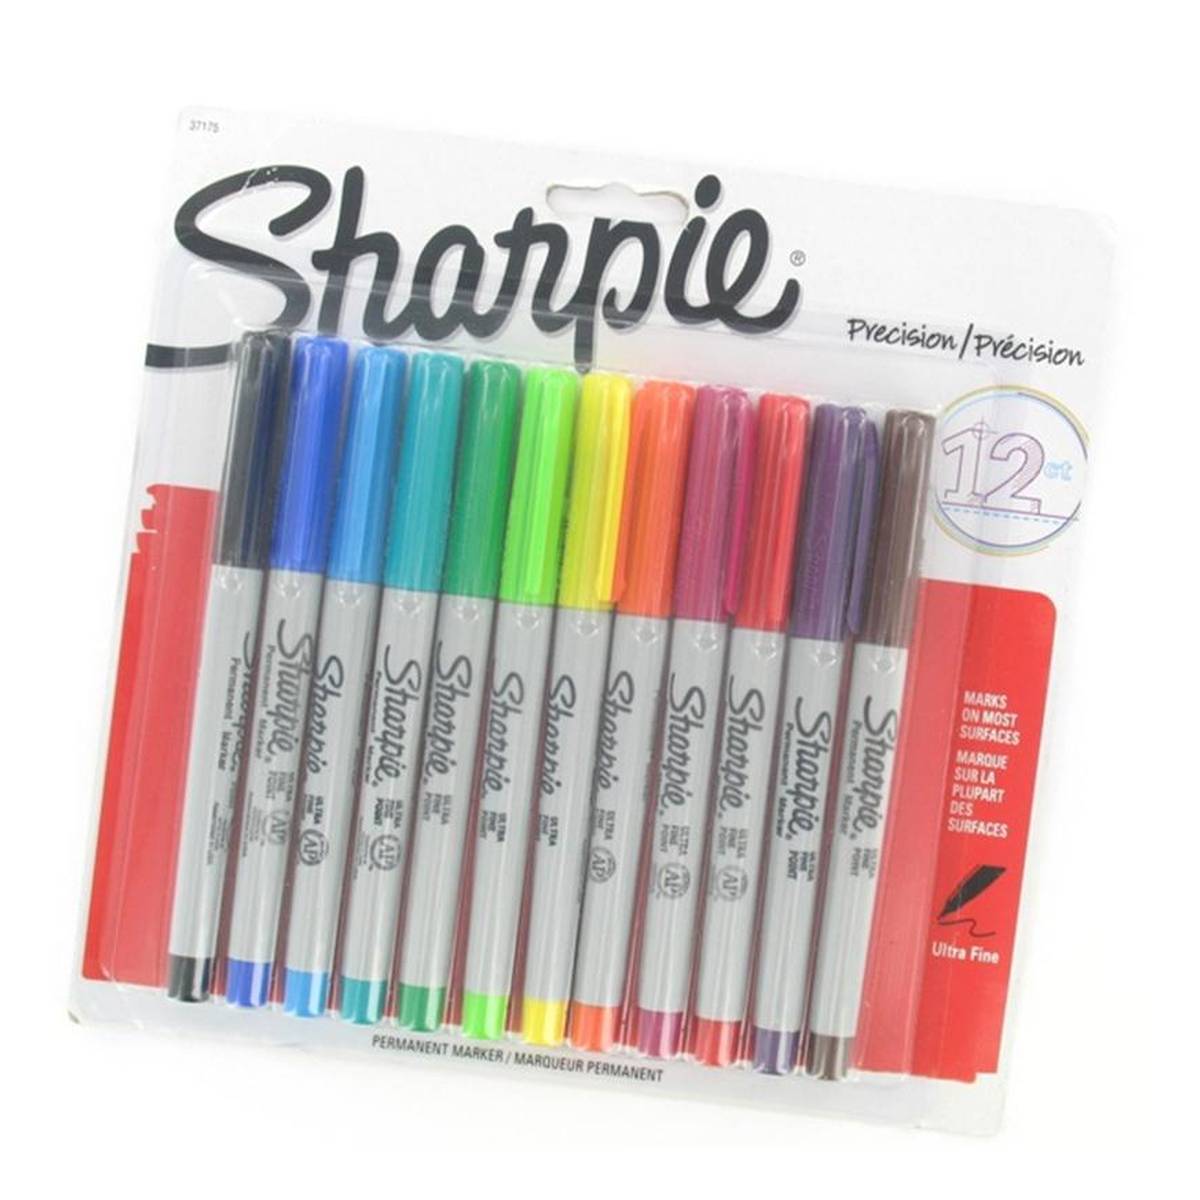 Sharpie Paint Marker, Glitter, Assorted, Extra Fine - 3 paint markers